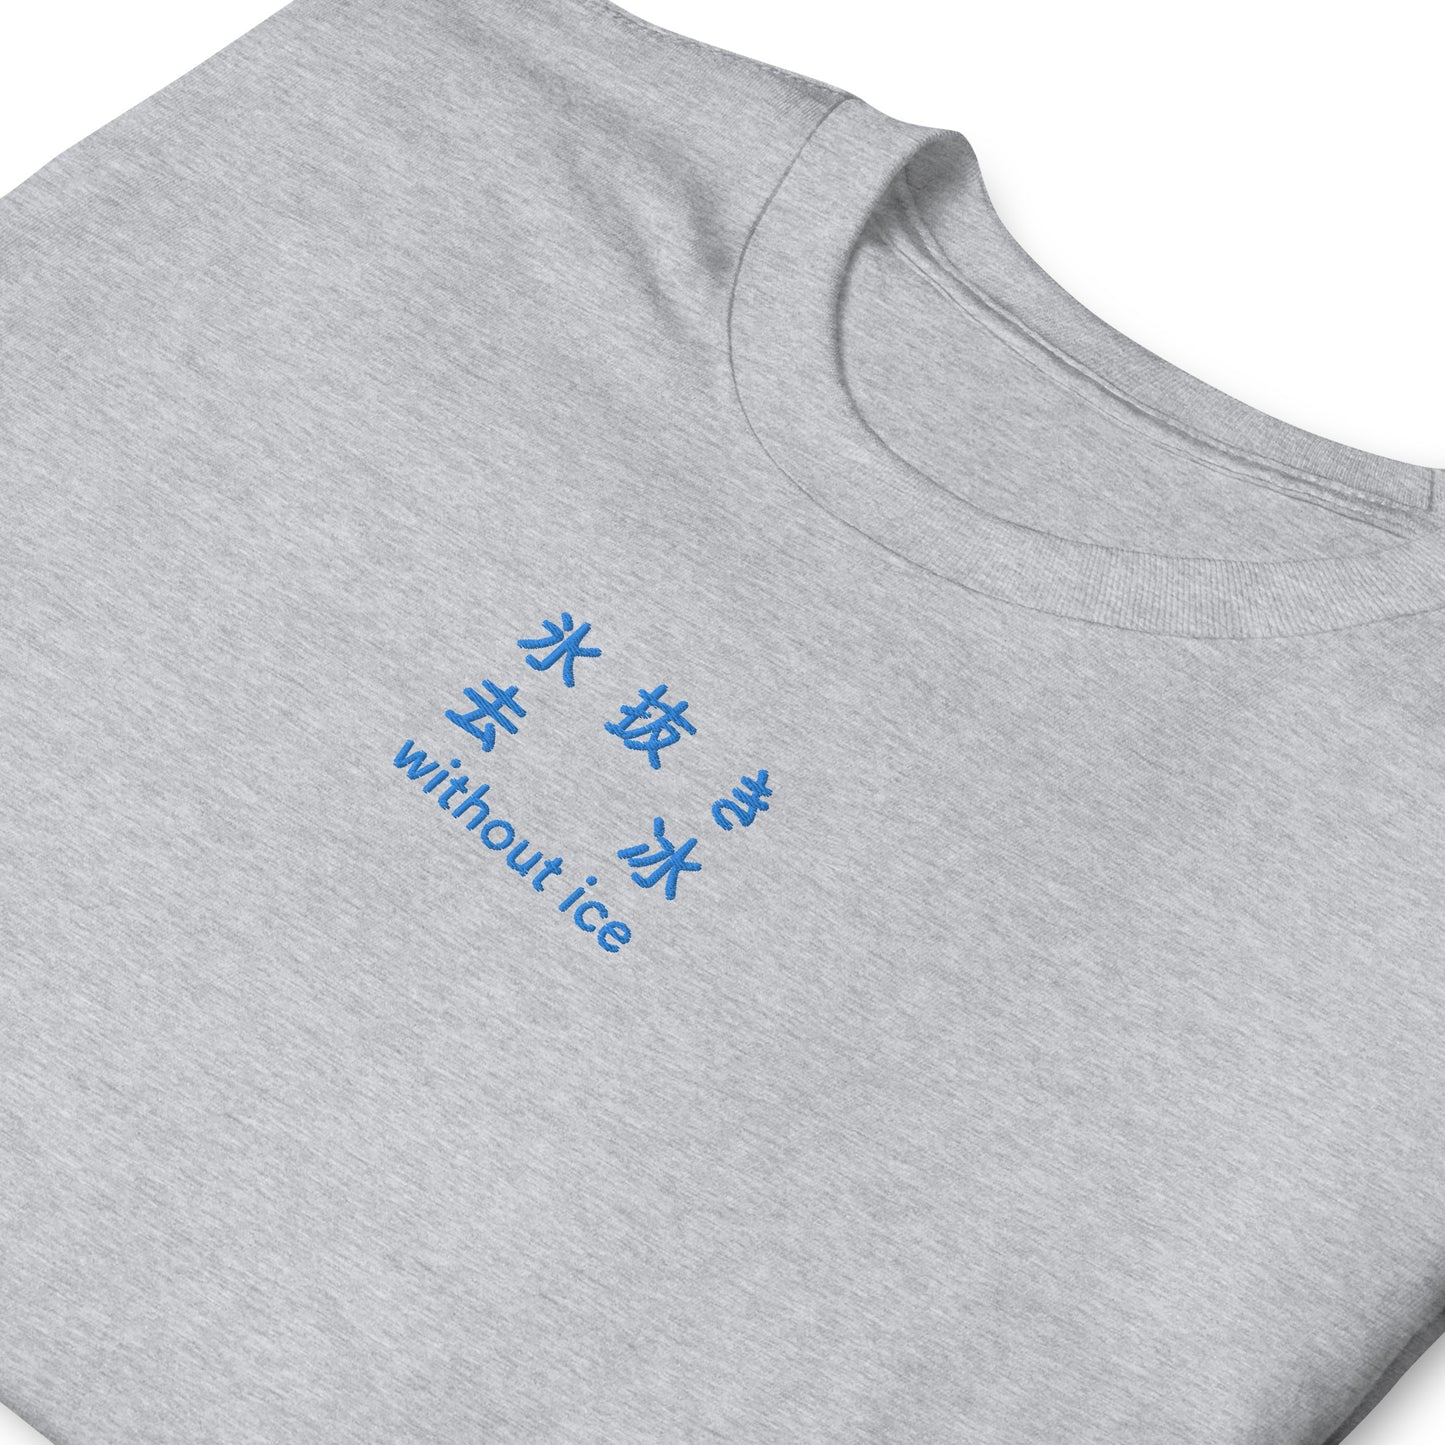 Light Gray High Quality Tee - Front Design with an Blue Embroidery "Without Ice" in Japanese,Chinese and English